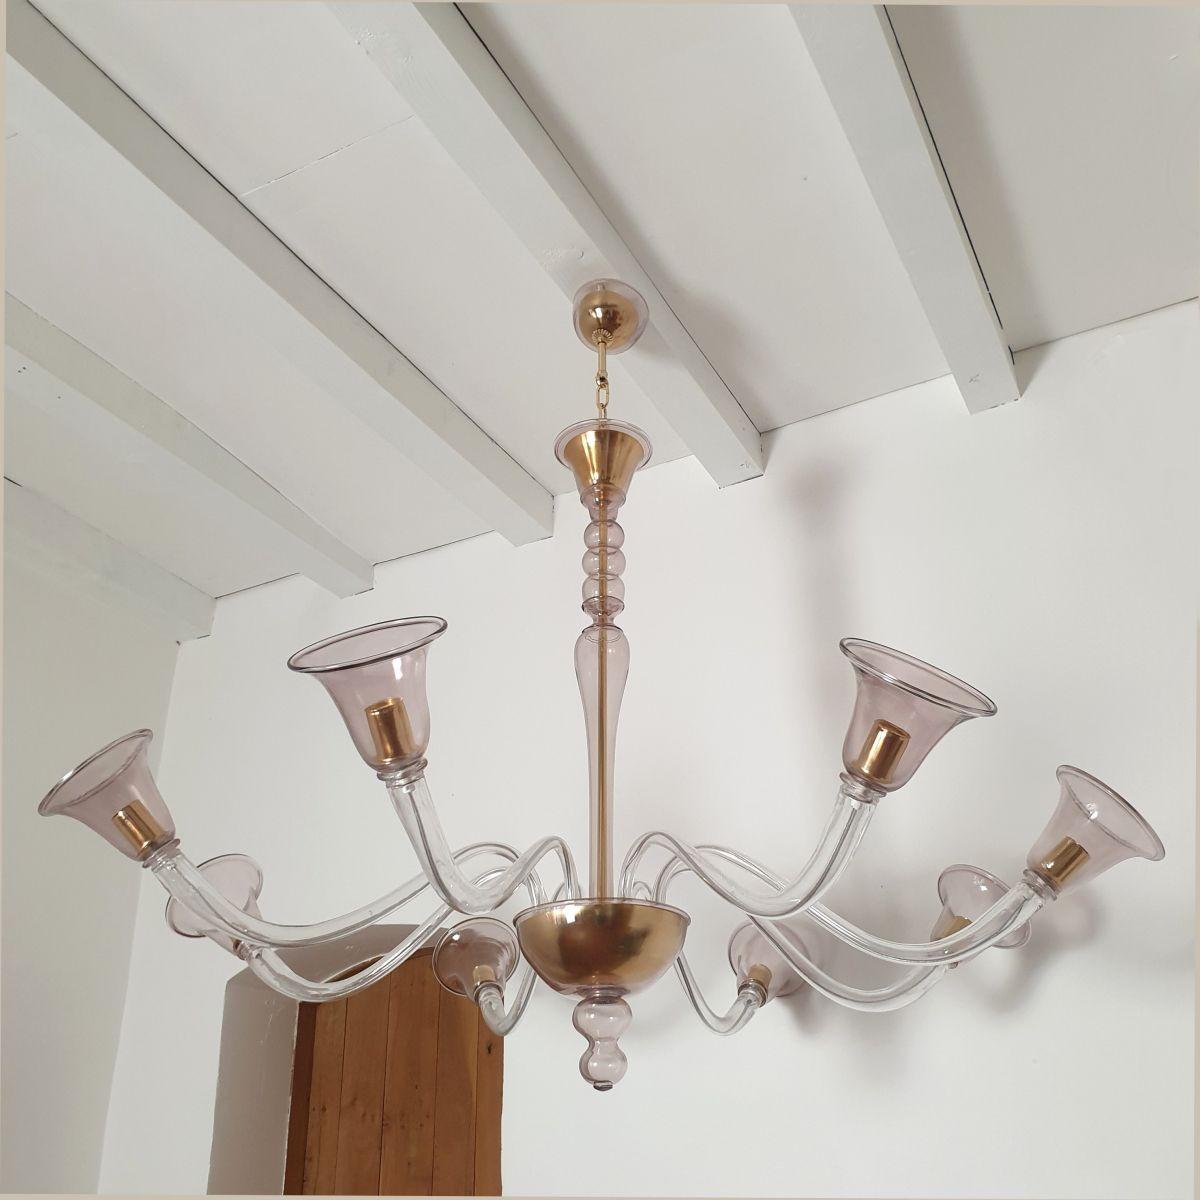 Large Mid Century Modern Murano glass chandelier, Seguso style, Italy 1980s.
The hand blown chandelier is made of a thin delicate light purple color Murano glass.
The curved Murano arms are transparent and purple.
The chandelier has gold plated